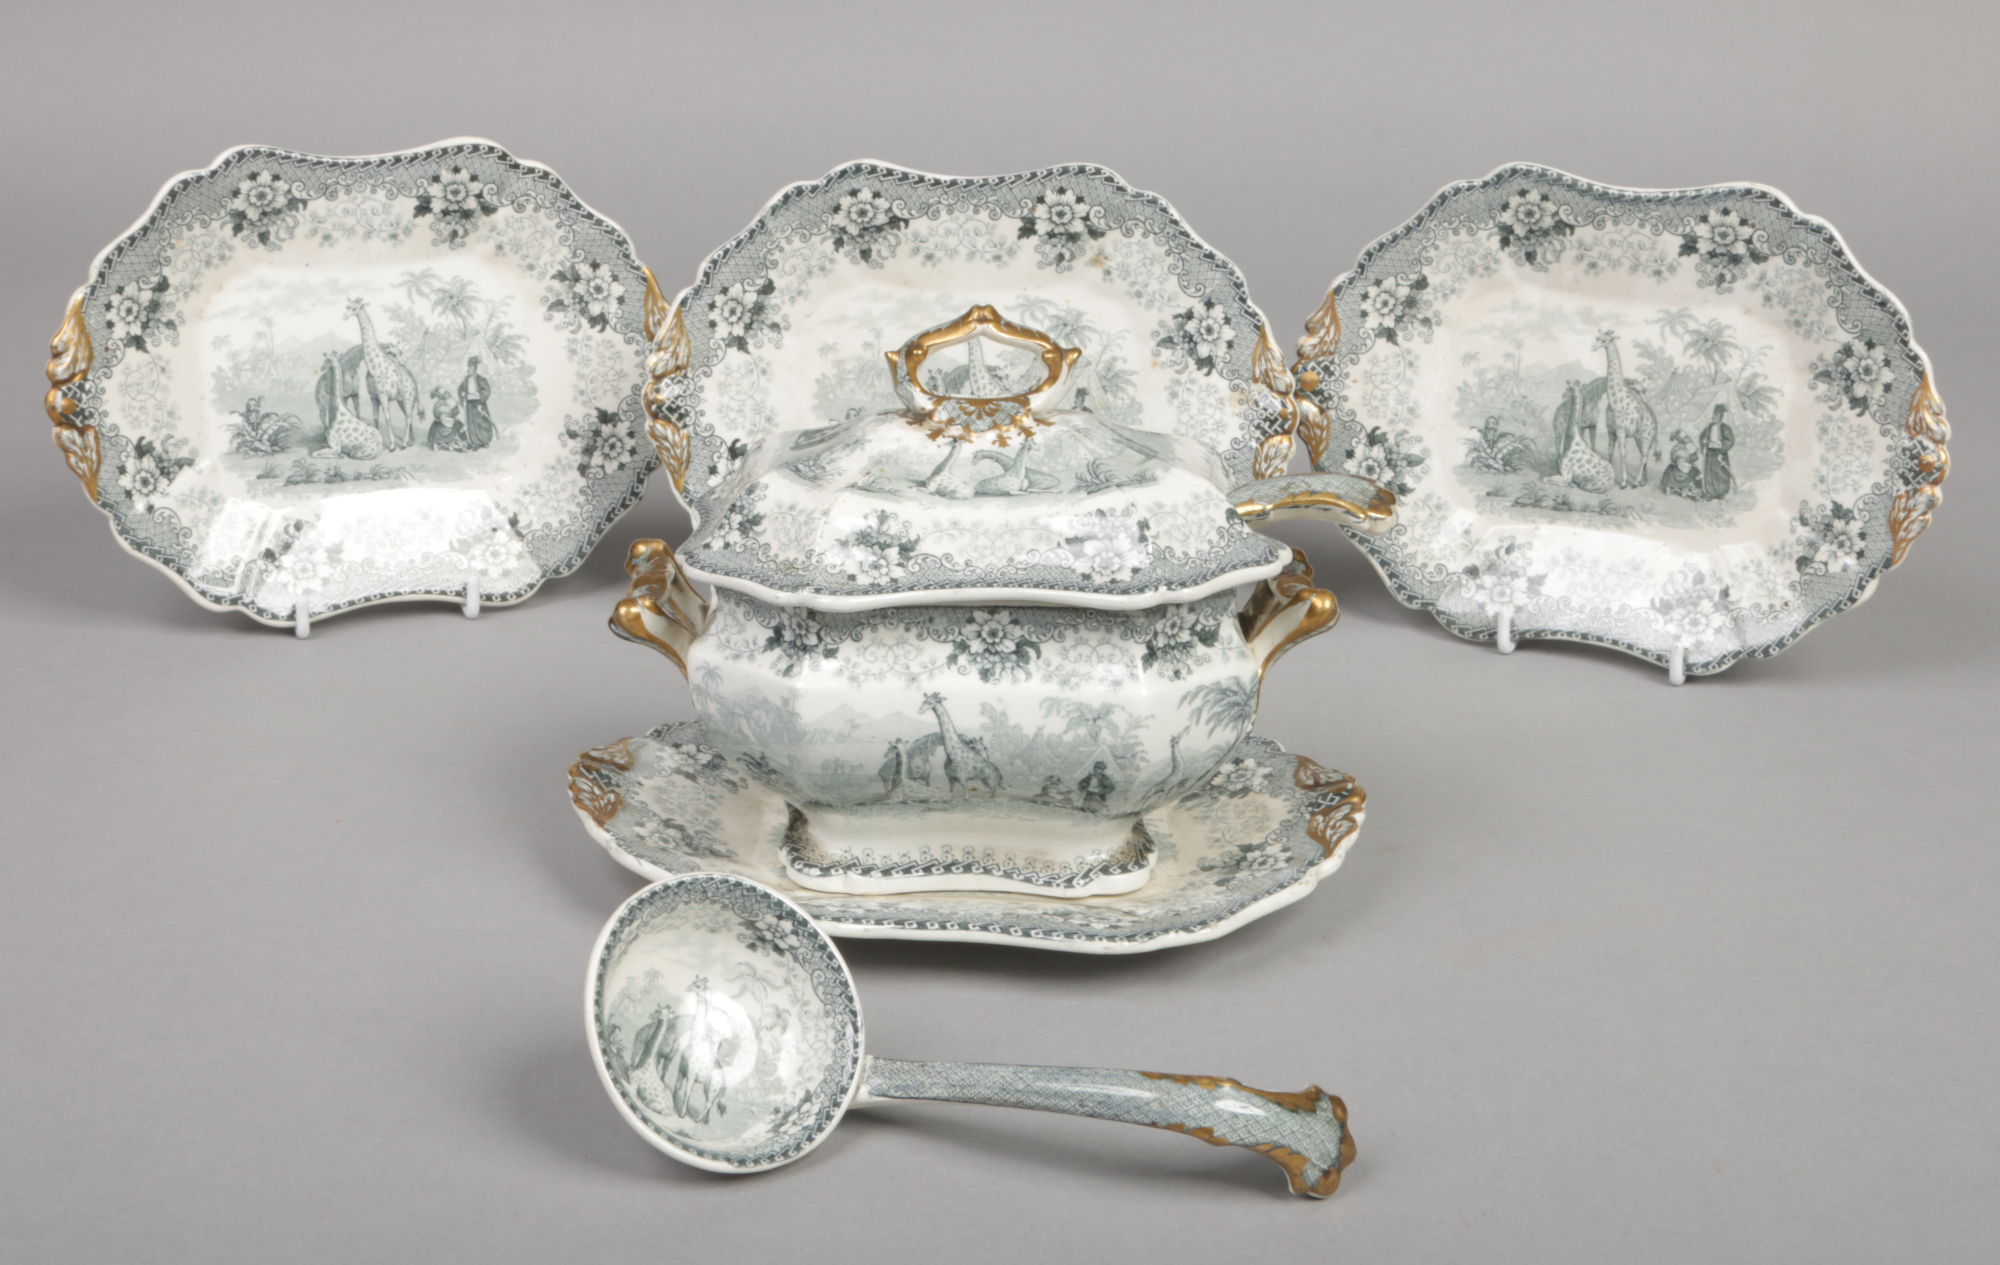 A John Ridgway sauce tureen, cover and stand, along with three more stands and two ladles. Printed